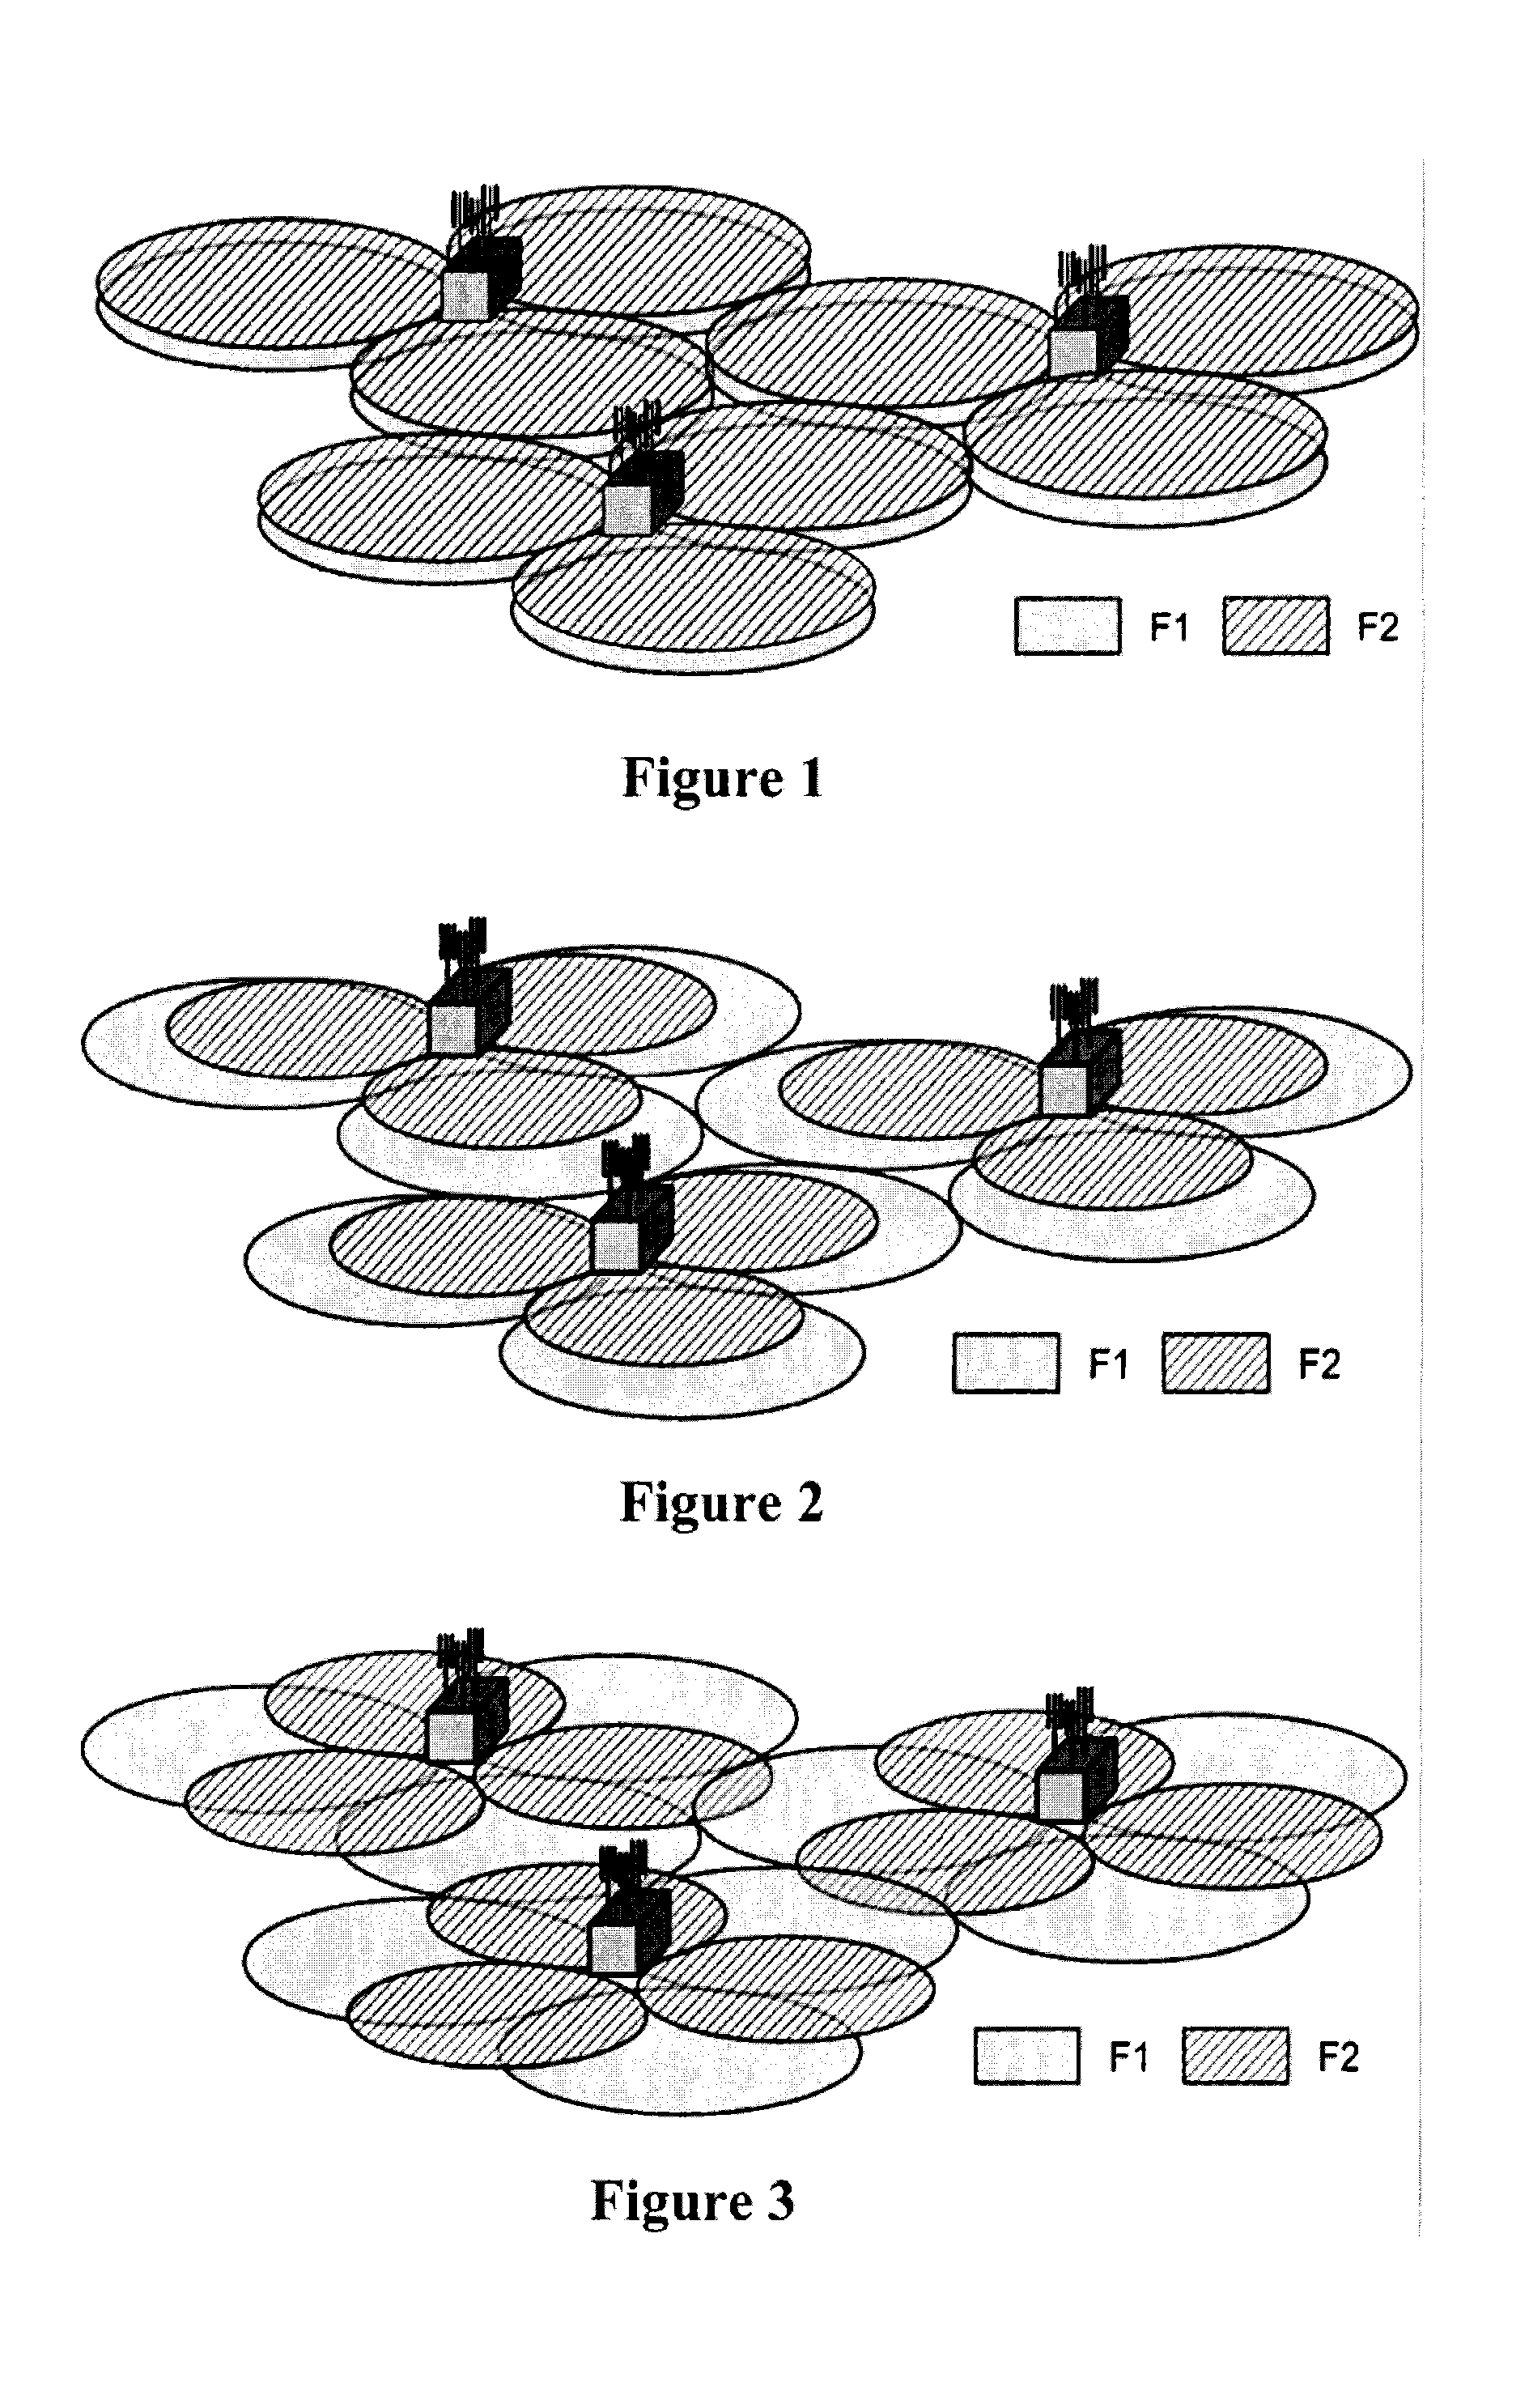 Method and device for activating and de-activating uplink of secondary cell of terminal